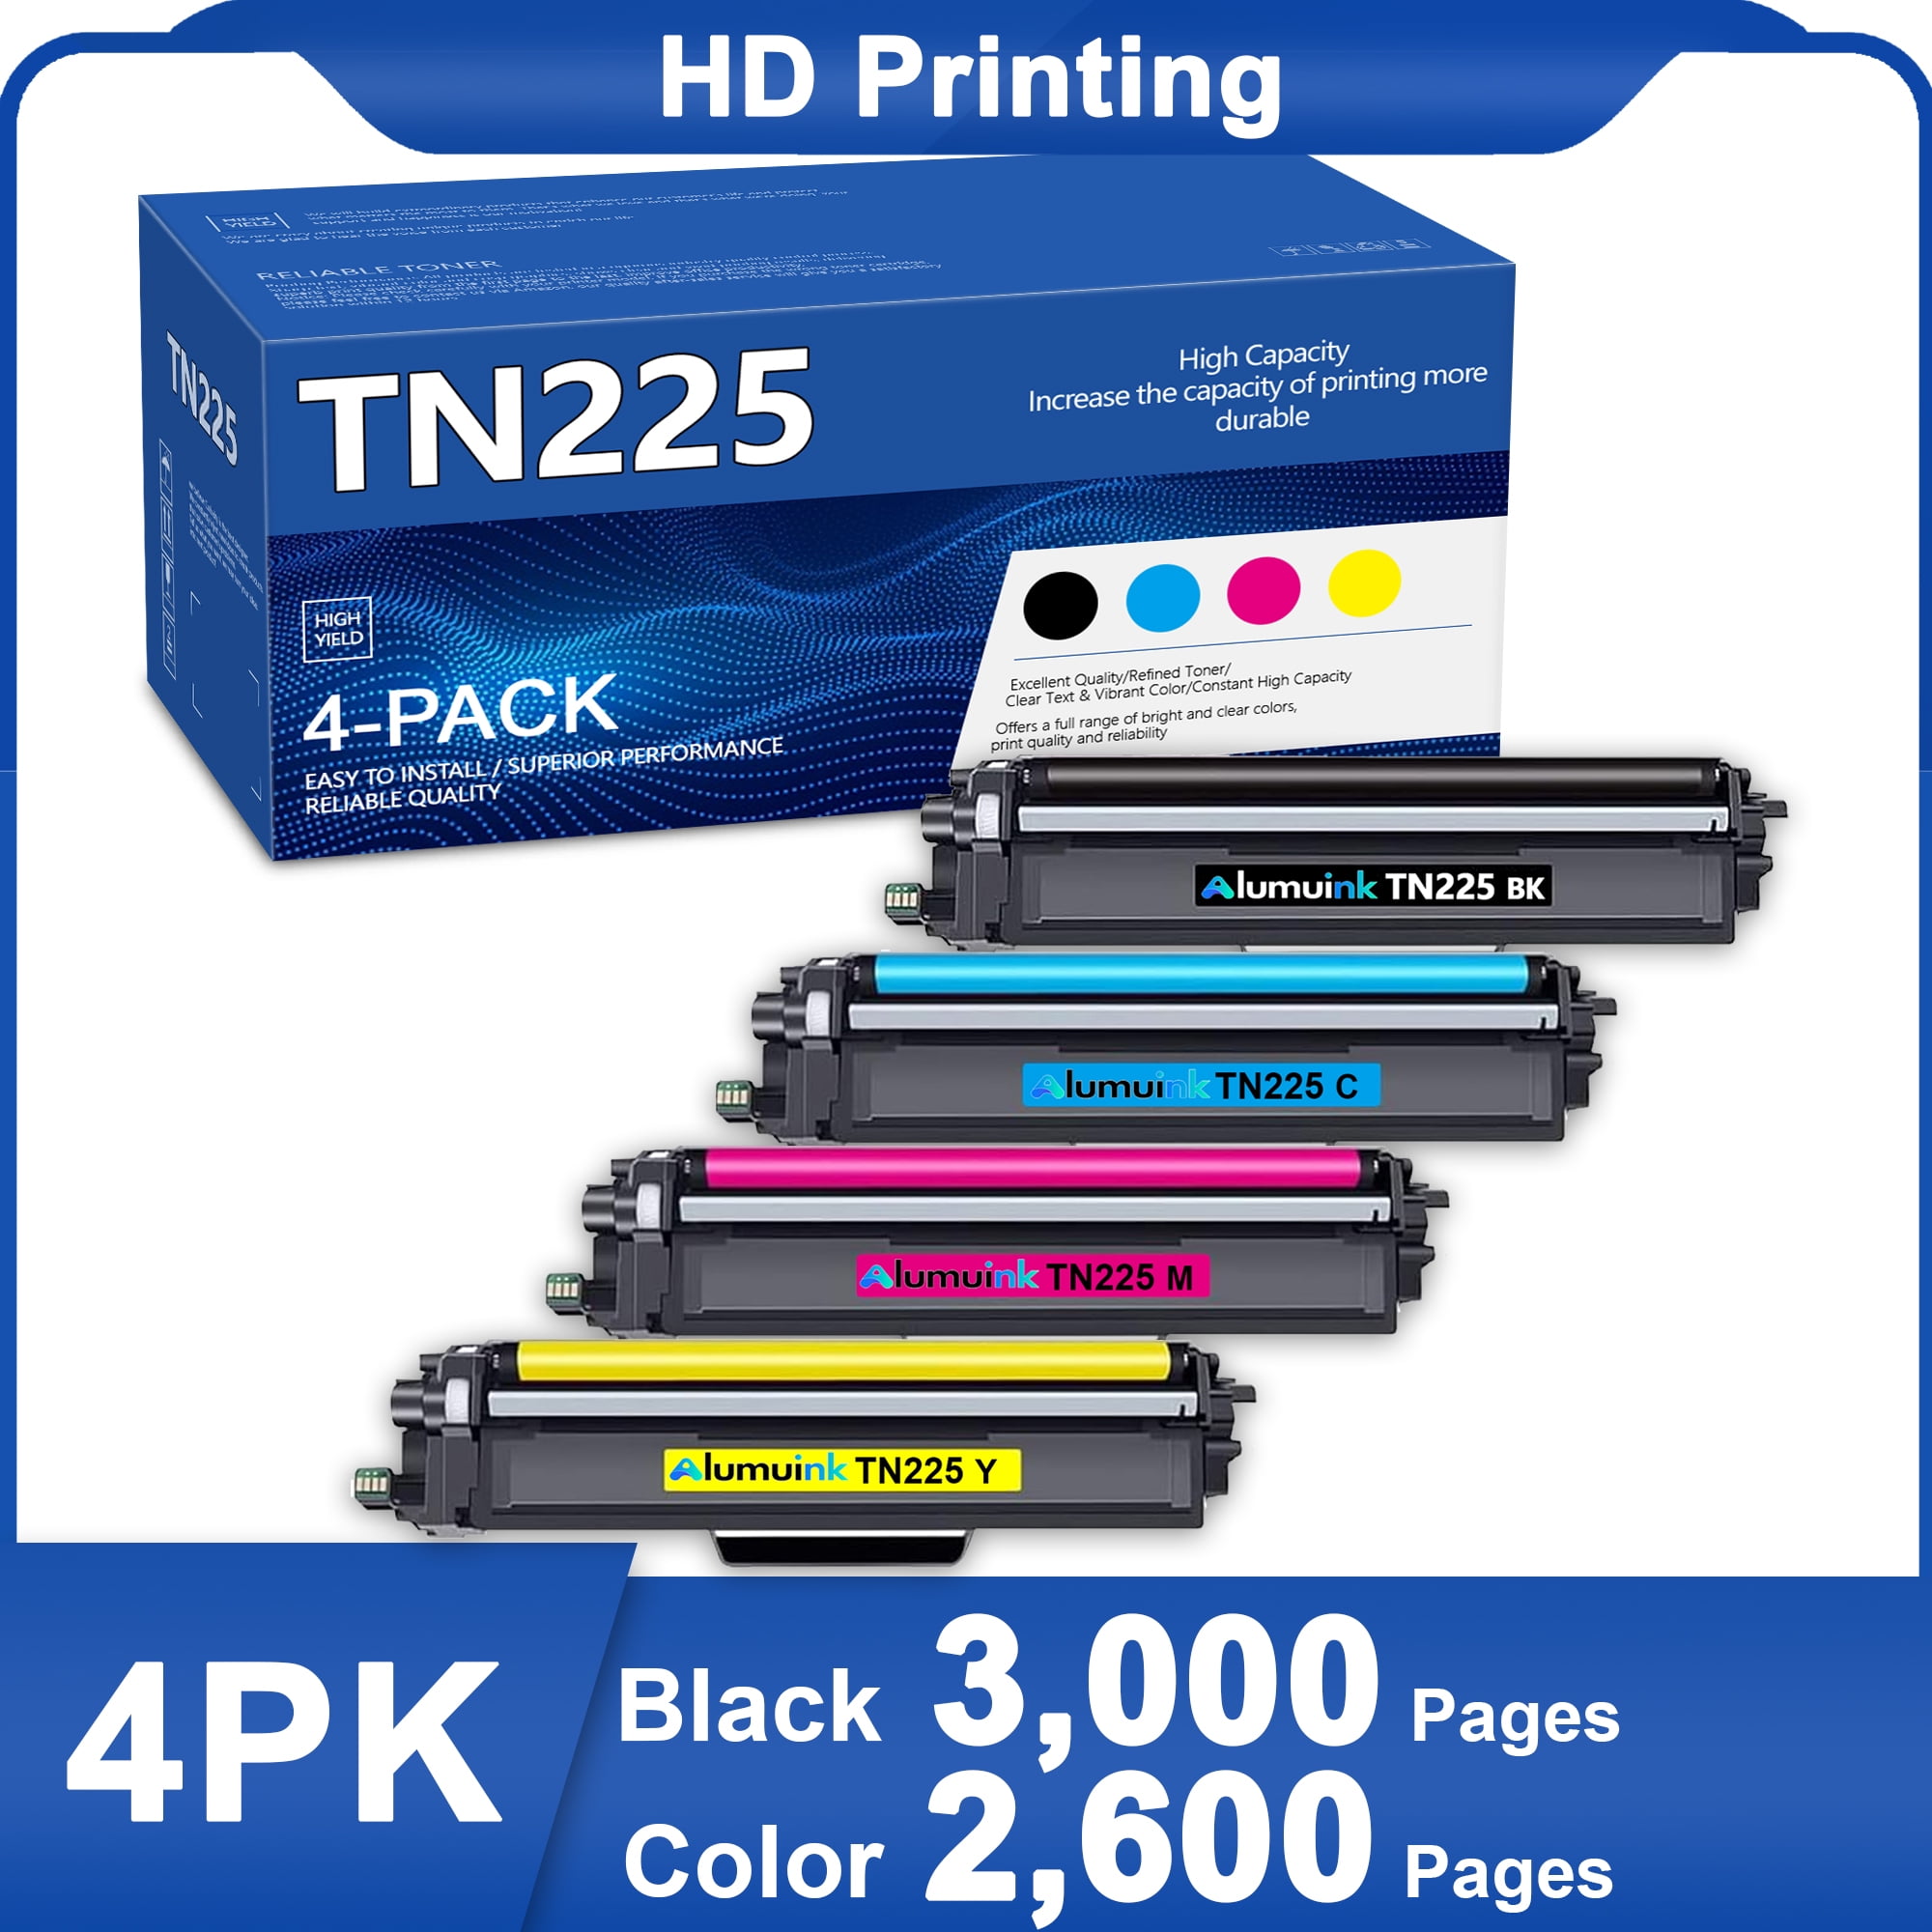 TN225 BK/C/M/Y 4-Color Set Toner Cartridge - Replacement for Brother MFC-9130CW  MFC-9340CDW Printer 